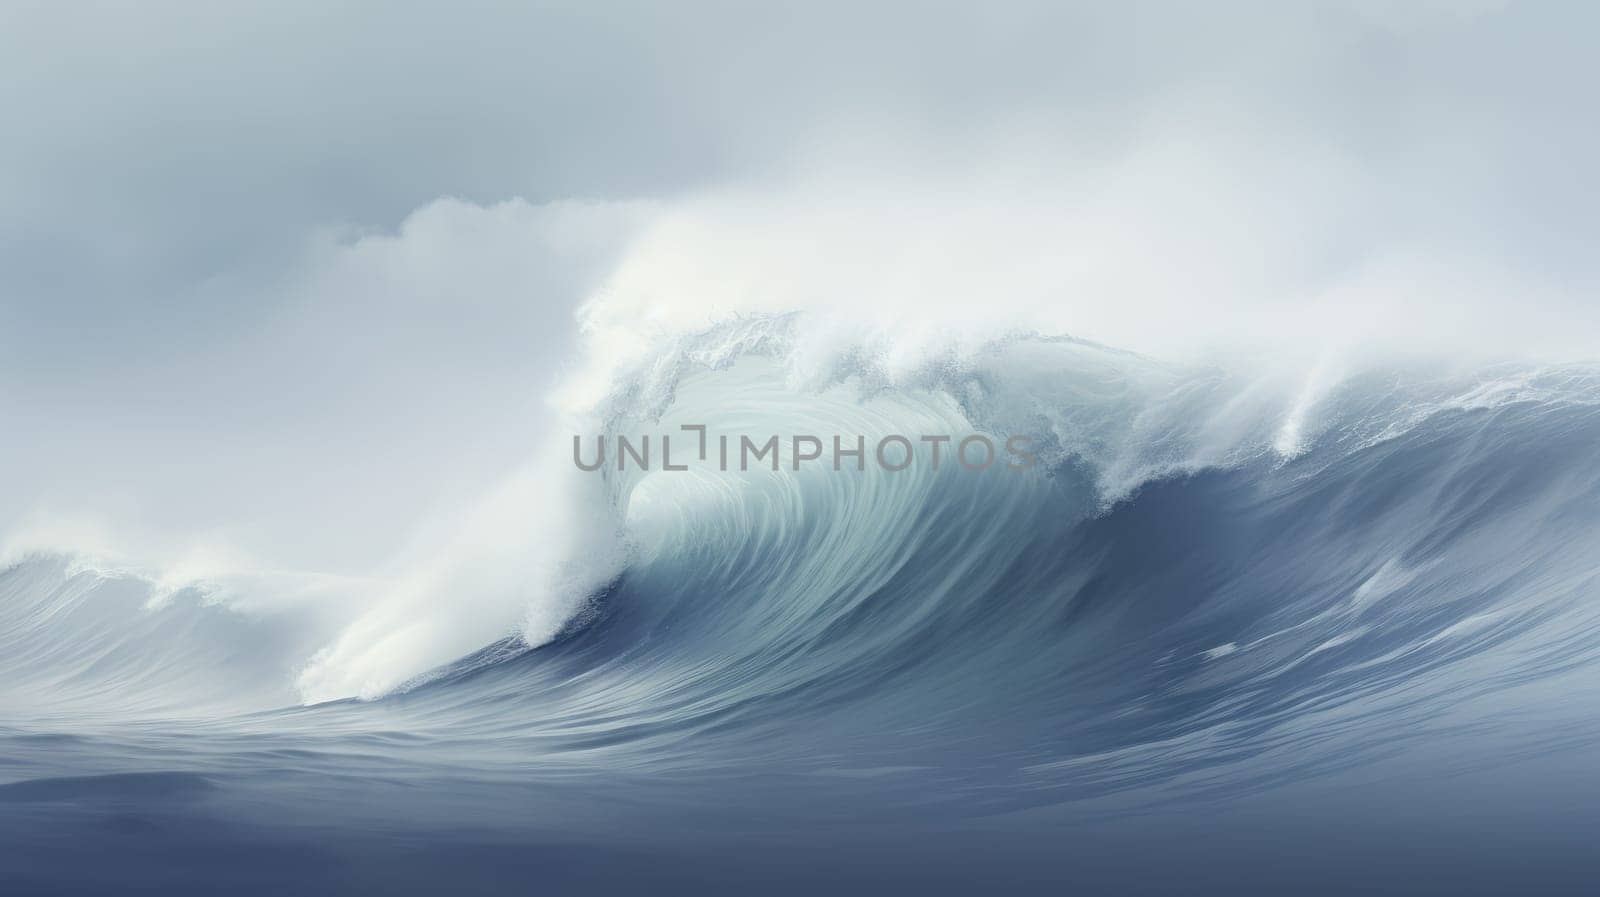 Ocean wave at wind. Huge wave breaking with a lot of spray and splash. Sea water background